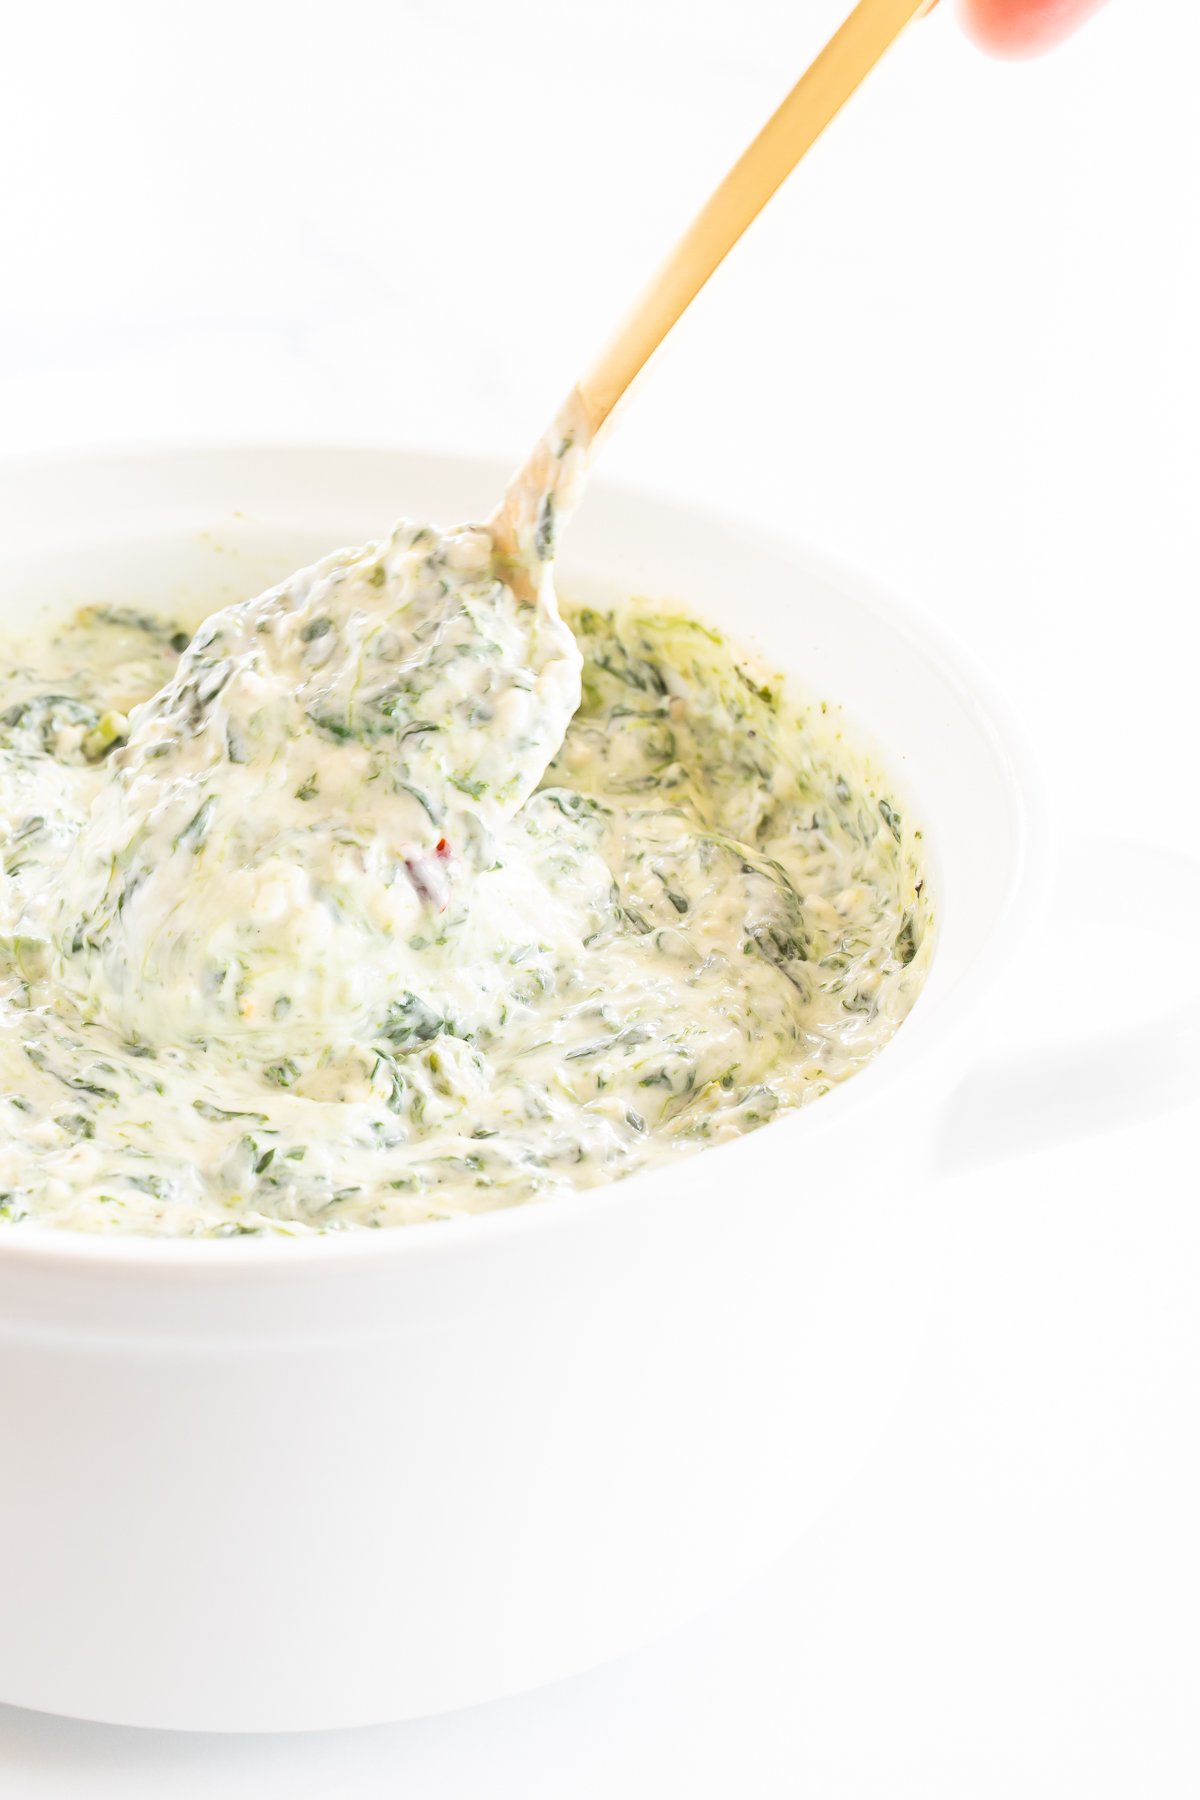 Spinach dip with cream cheese in a white bowl with a wooden spoon.